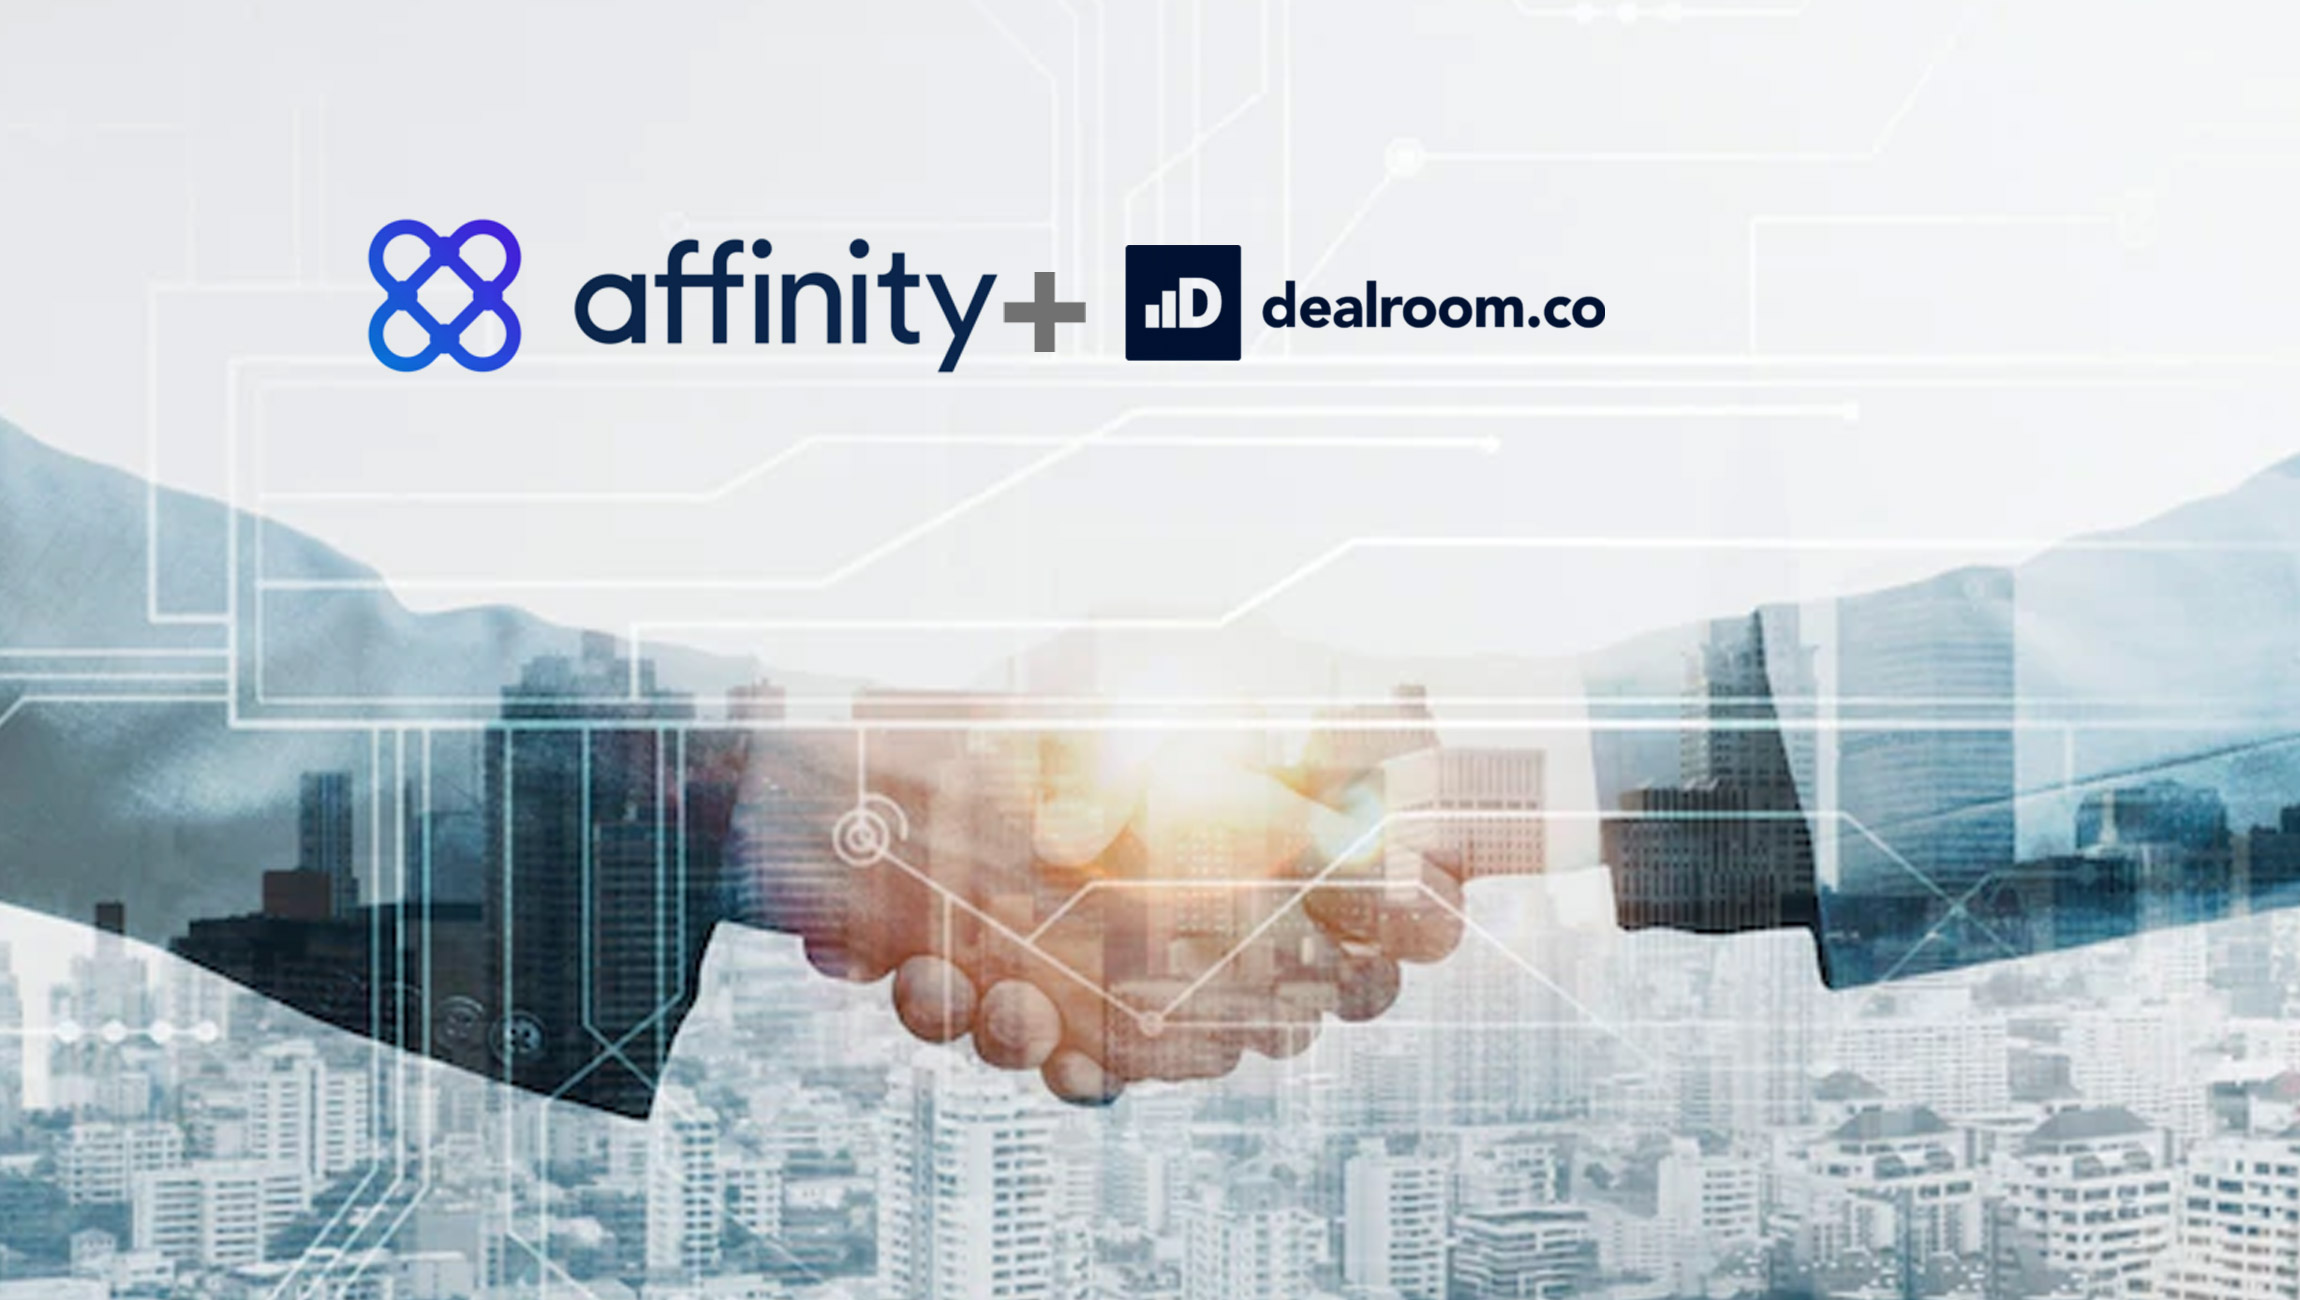 Affinity and Dealroom.co Partner to Bring Global Relationship and Predictive Intelligence to Dealmakers